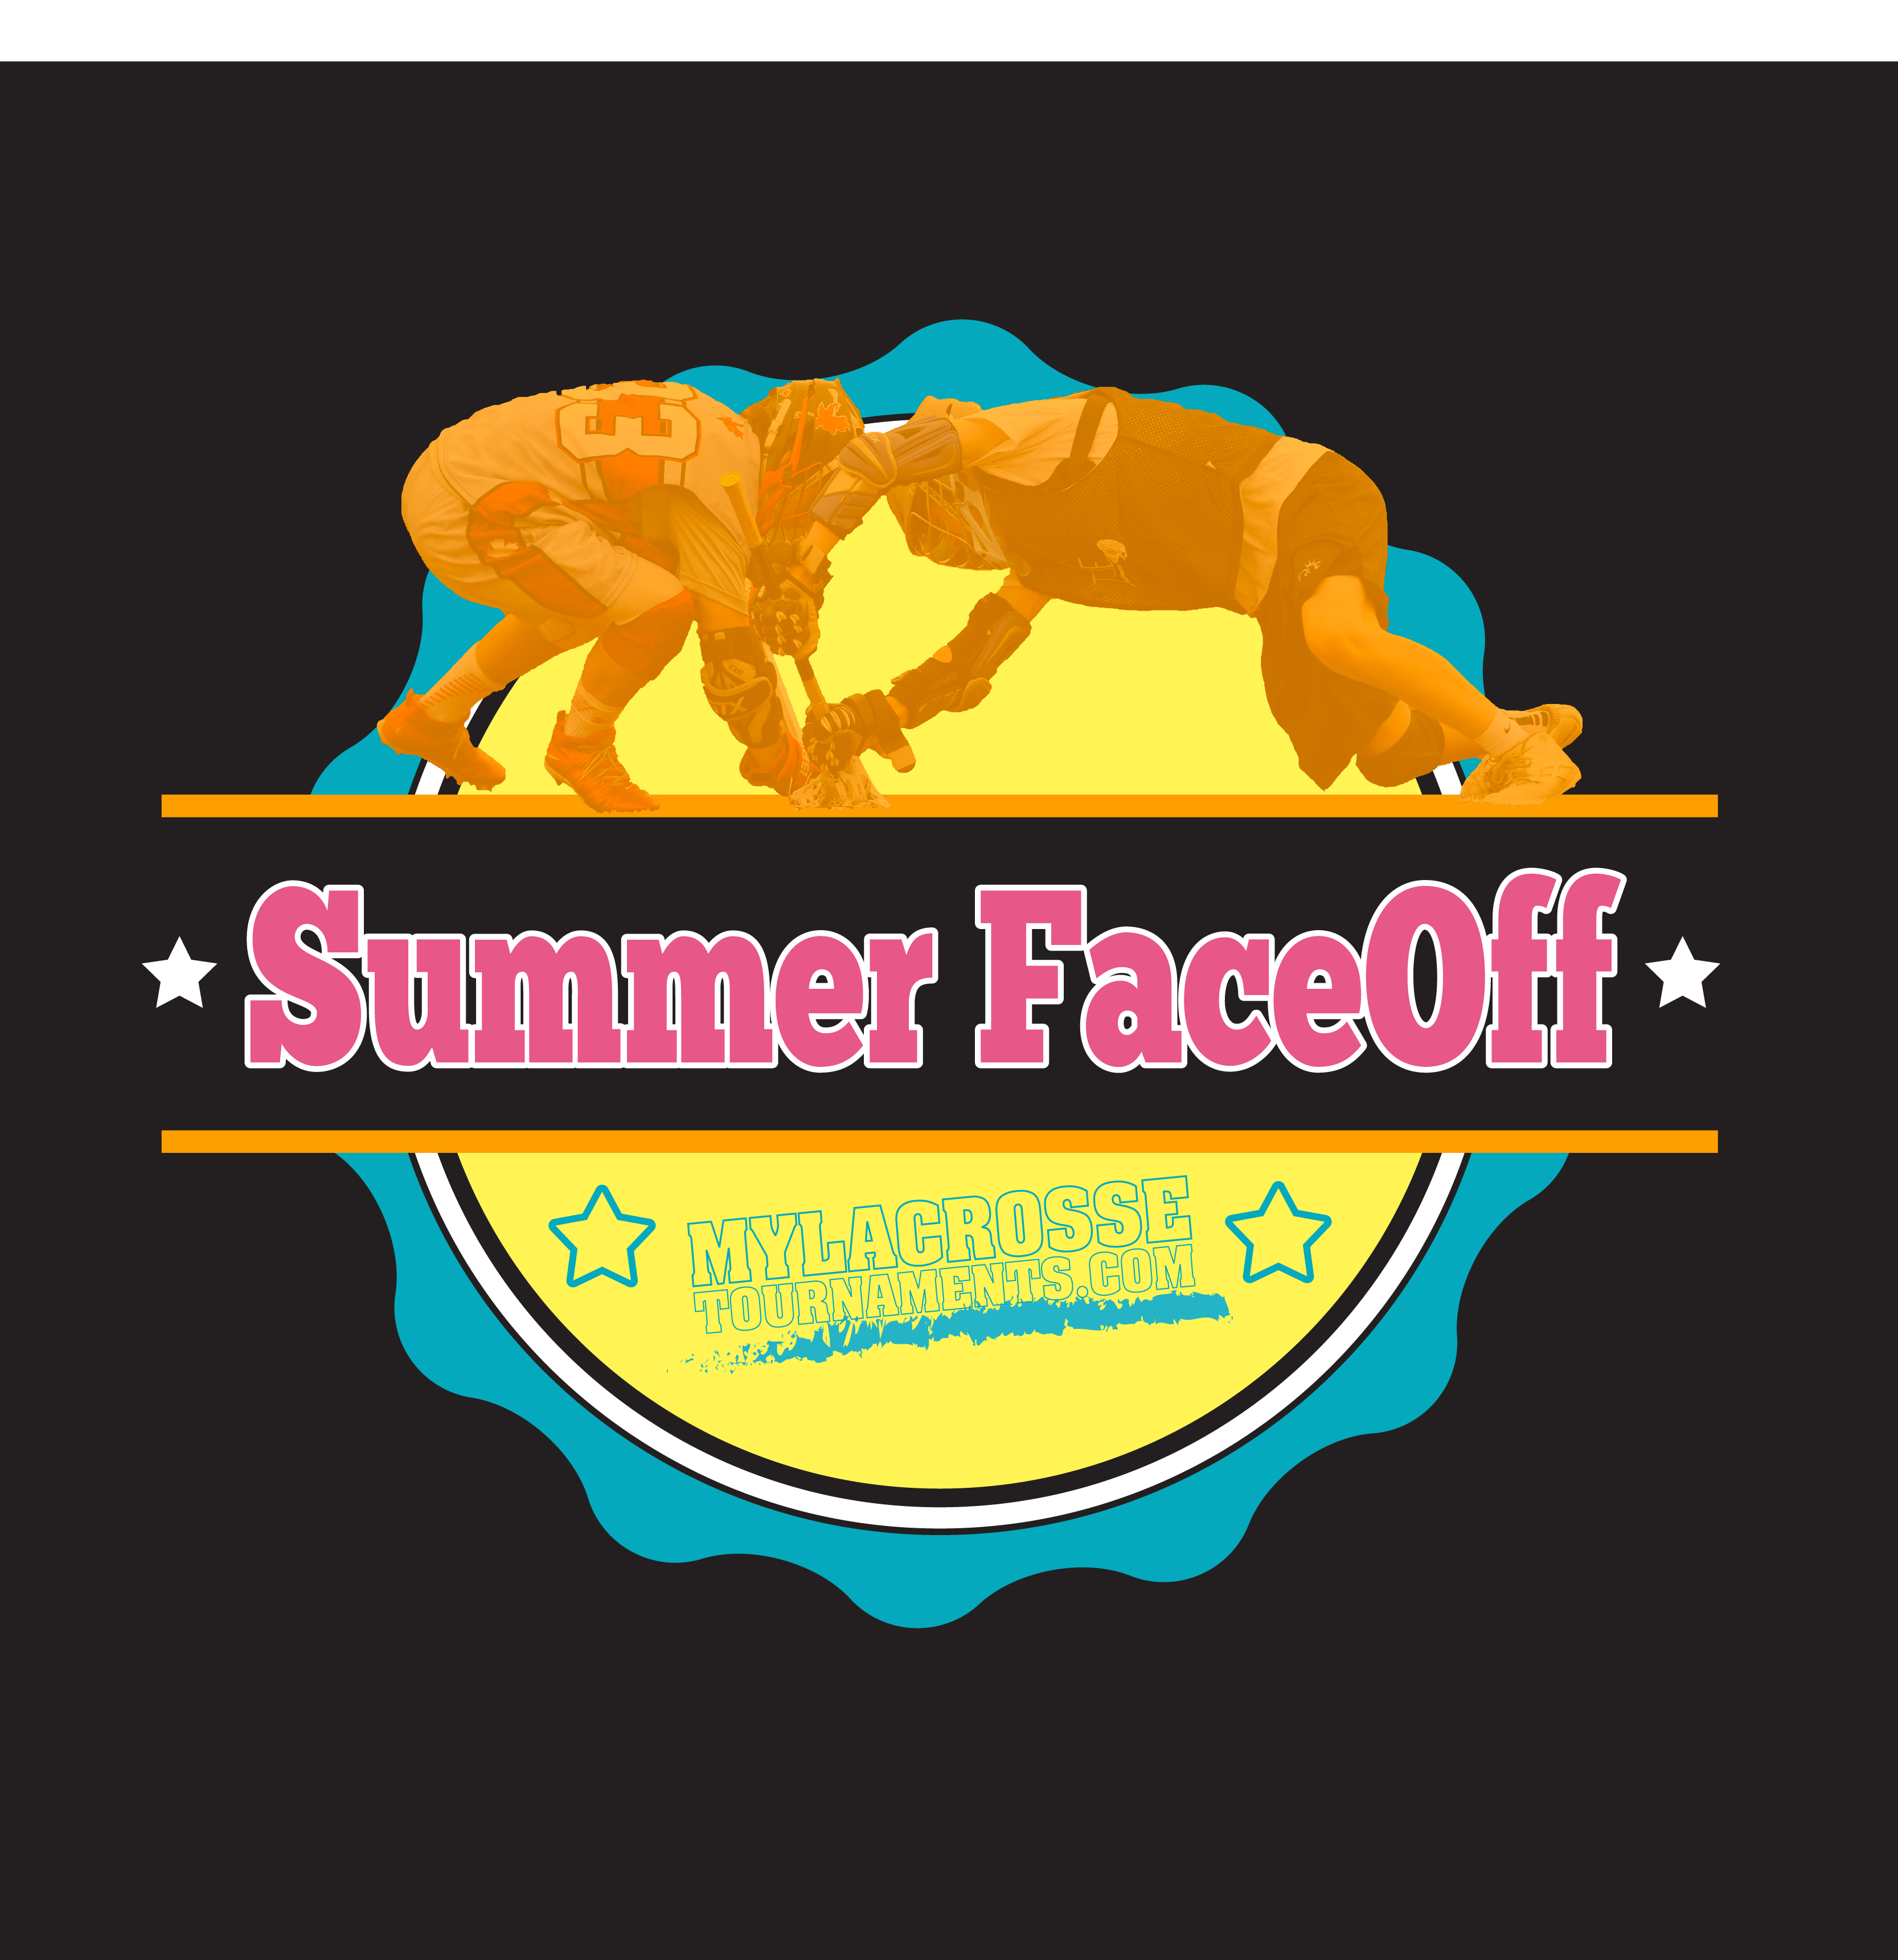 2019 Summer Faceoff My Lacrosse Tournaments